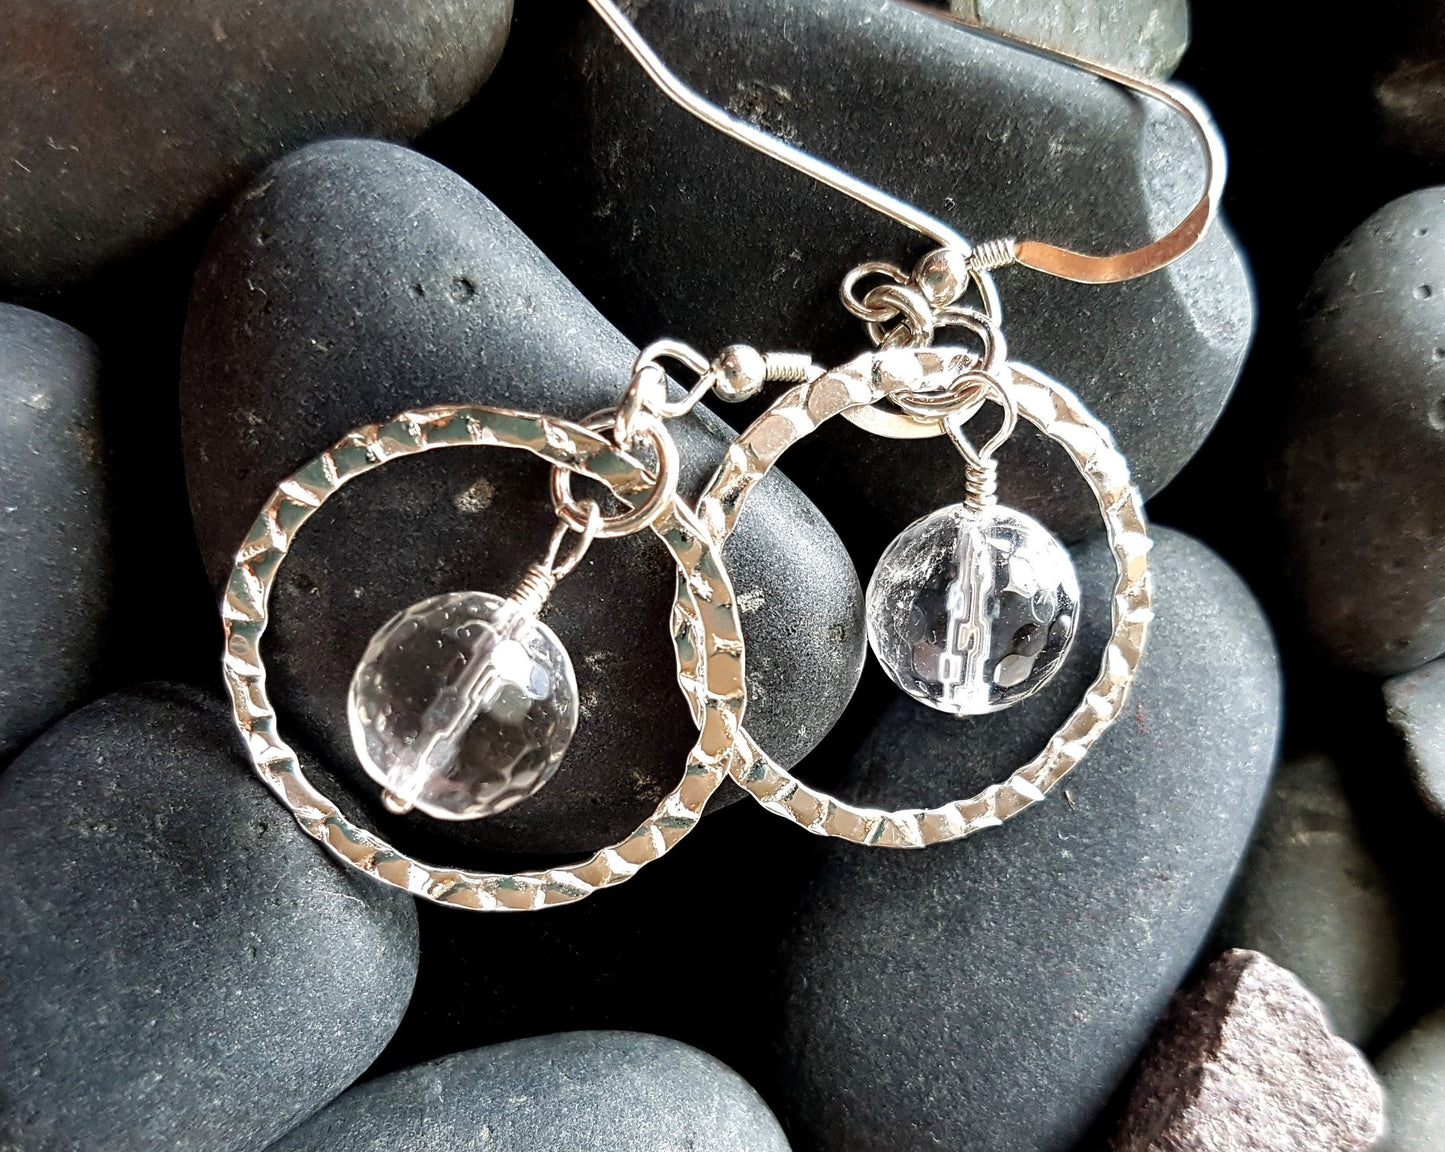 Rock Crystal Infinity Earrings, Handmade with Sterling Silver and Natural Clear Quartz Crystal. 